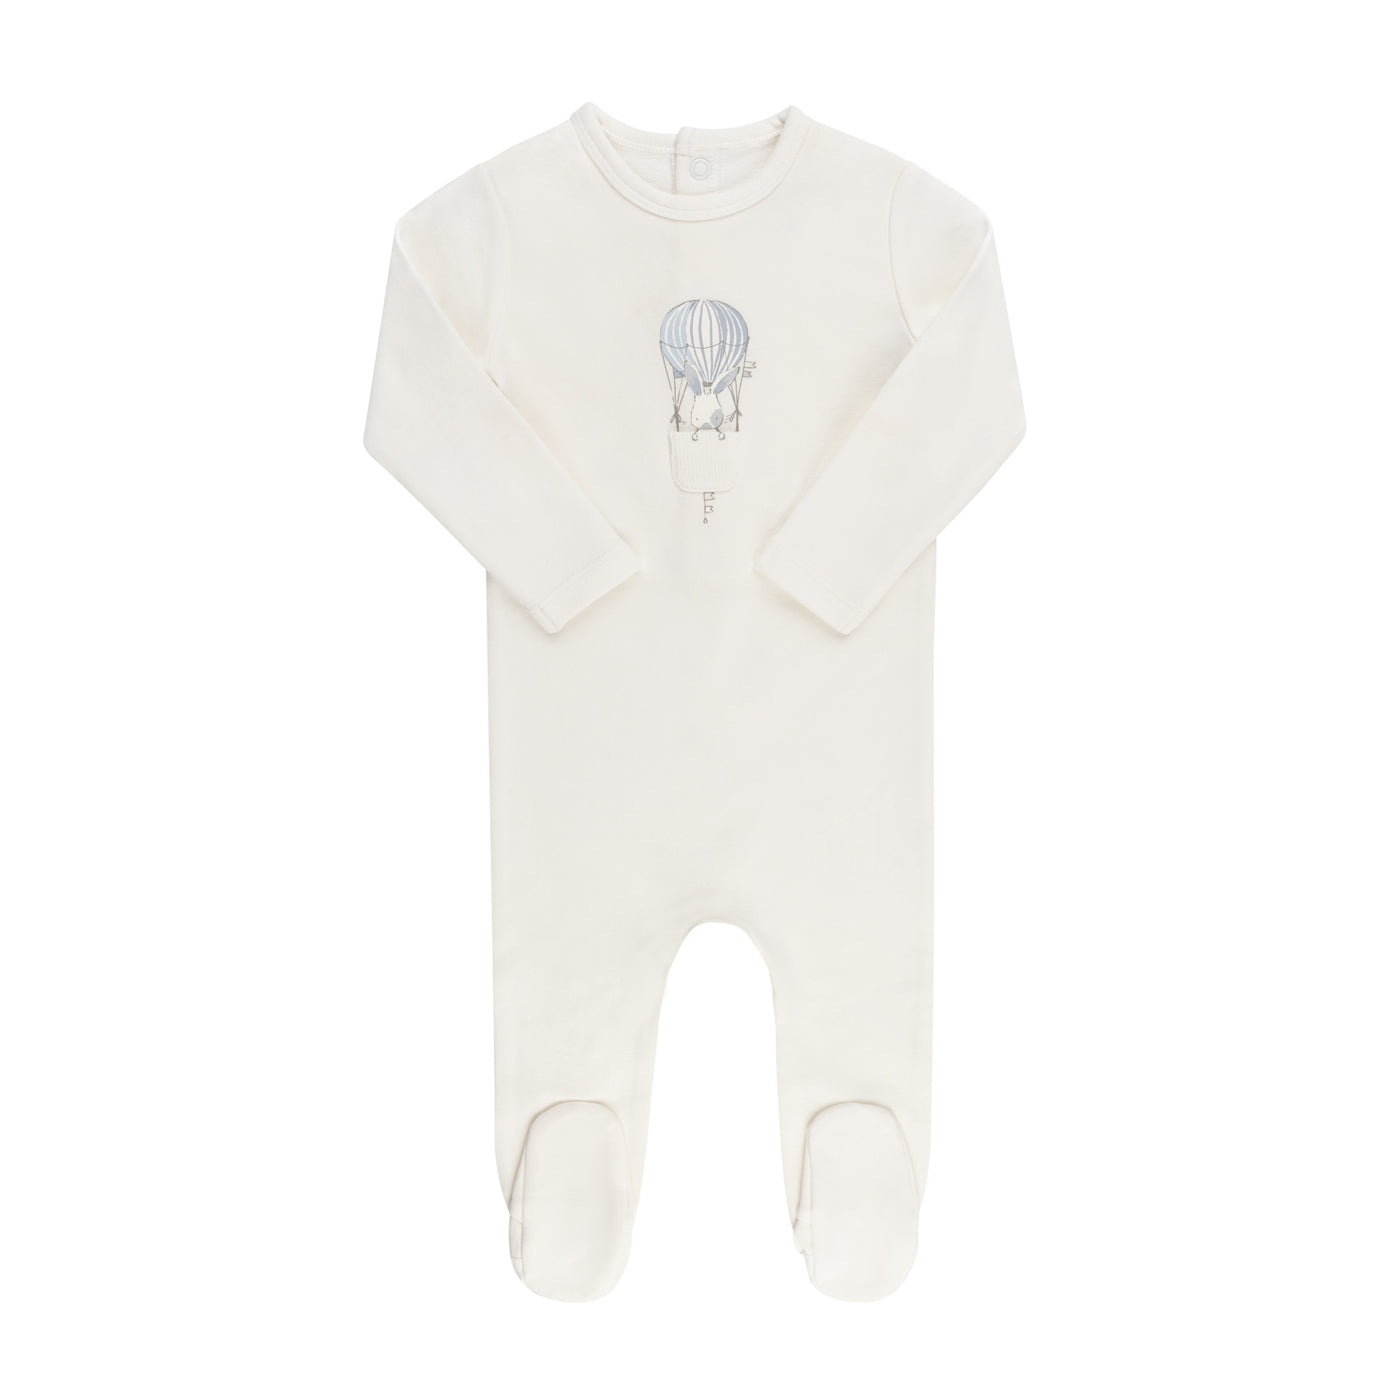 Ely's & Co. Hot Air Balloon Collection Ivory/Blue Footie